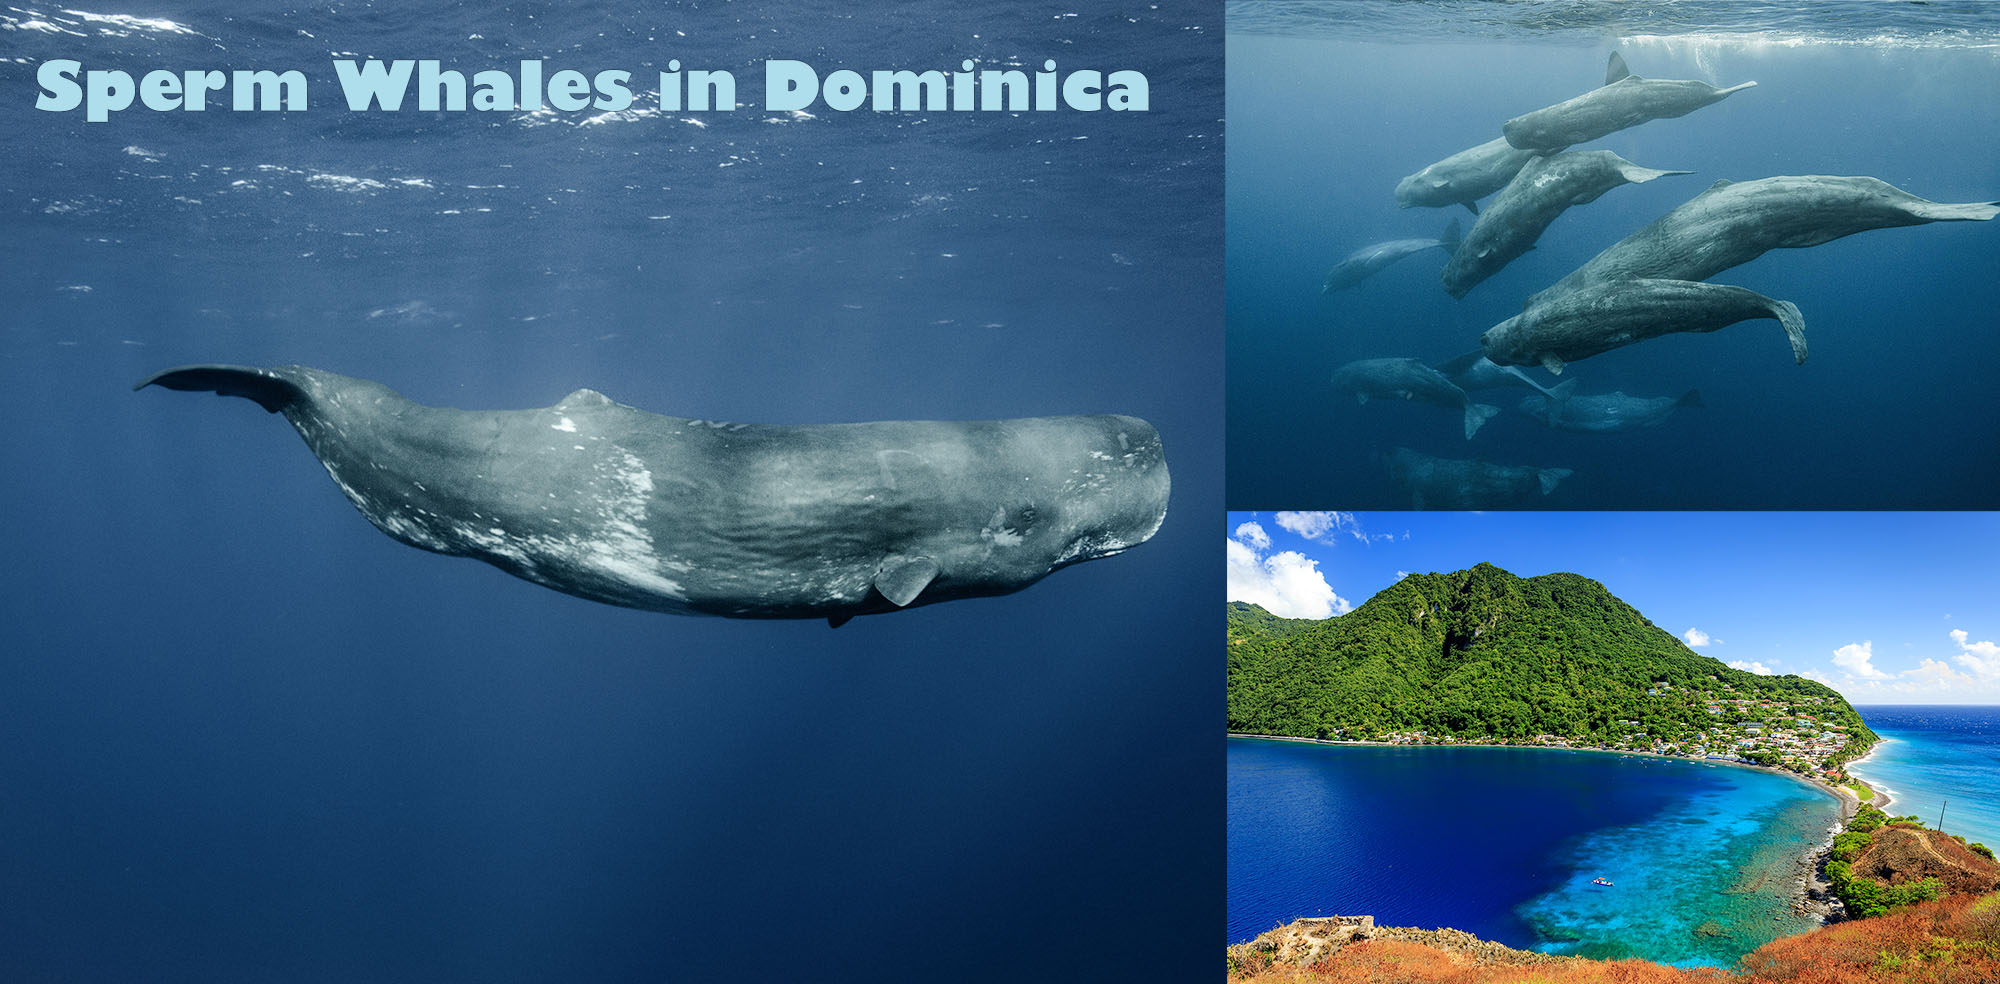 Swim with sperm whales on island of Dominica